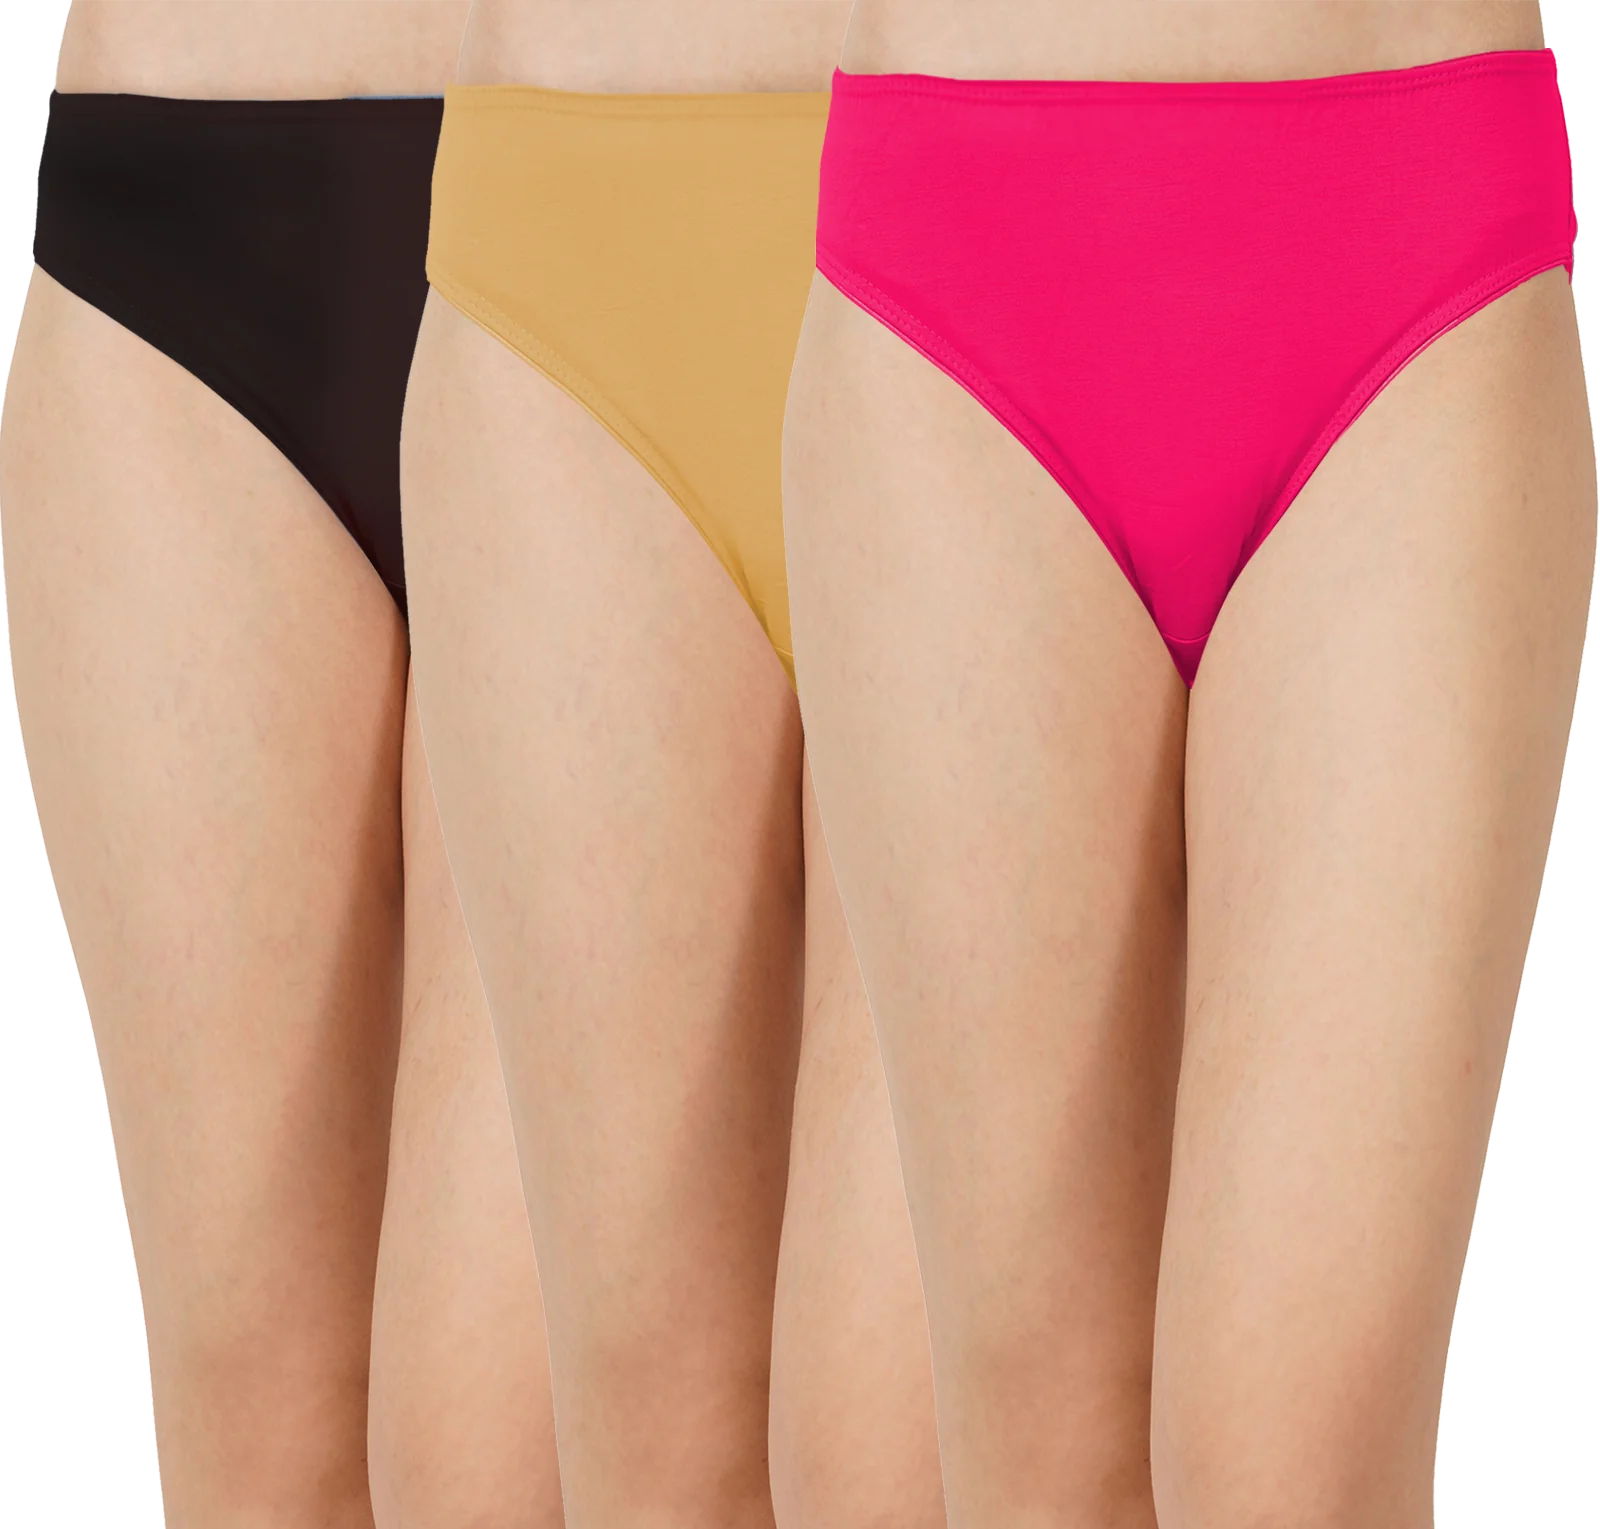 Product: Bamboo Fabric Panty Set For Girls of 2-3 years | Pack of 3